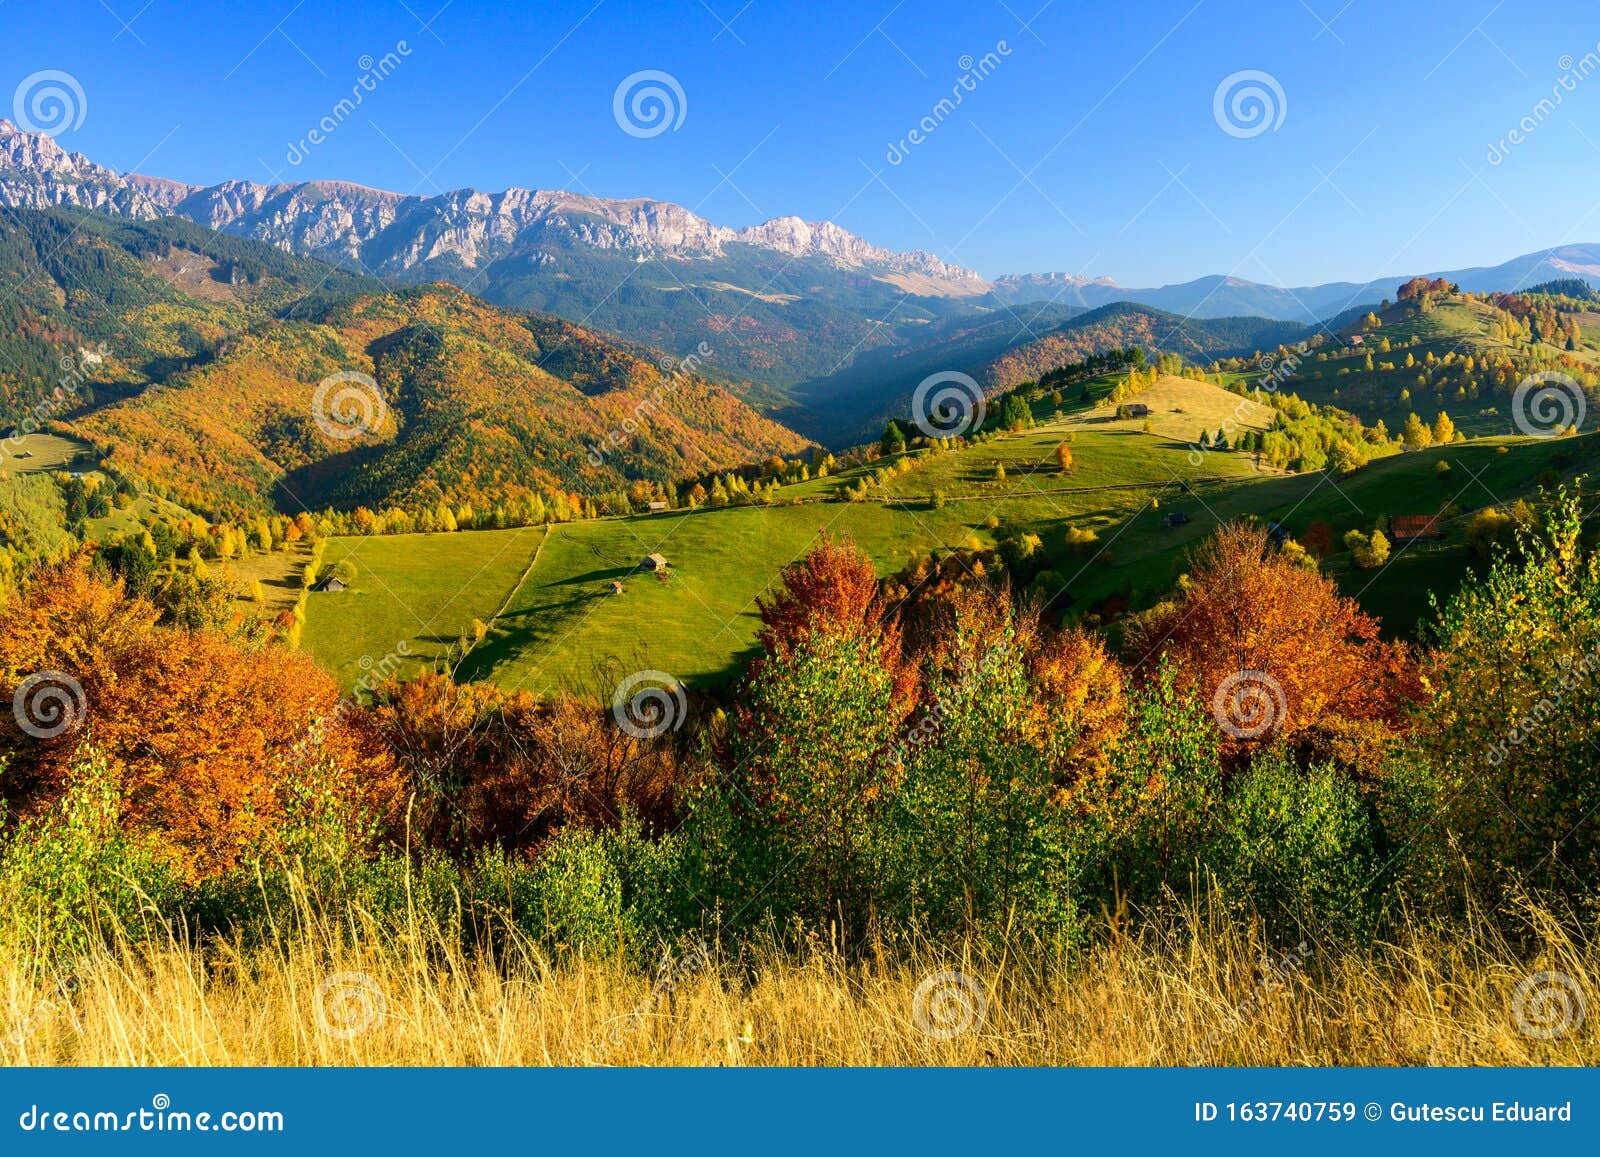 Autumn Morning in the Mountain of Transylvania, Nature Travel on Country Side of Romania Stock Image - Image of house, relaxing: 163740759